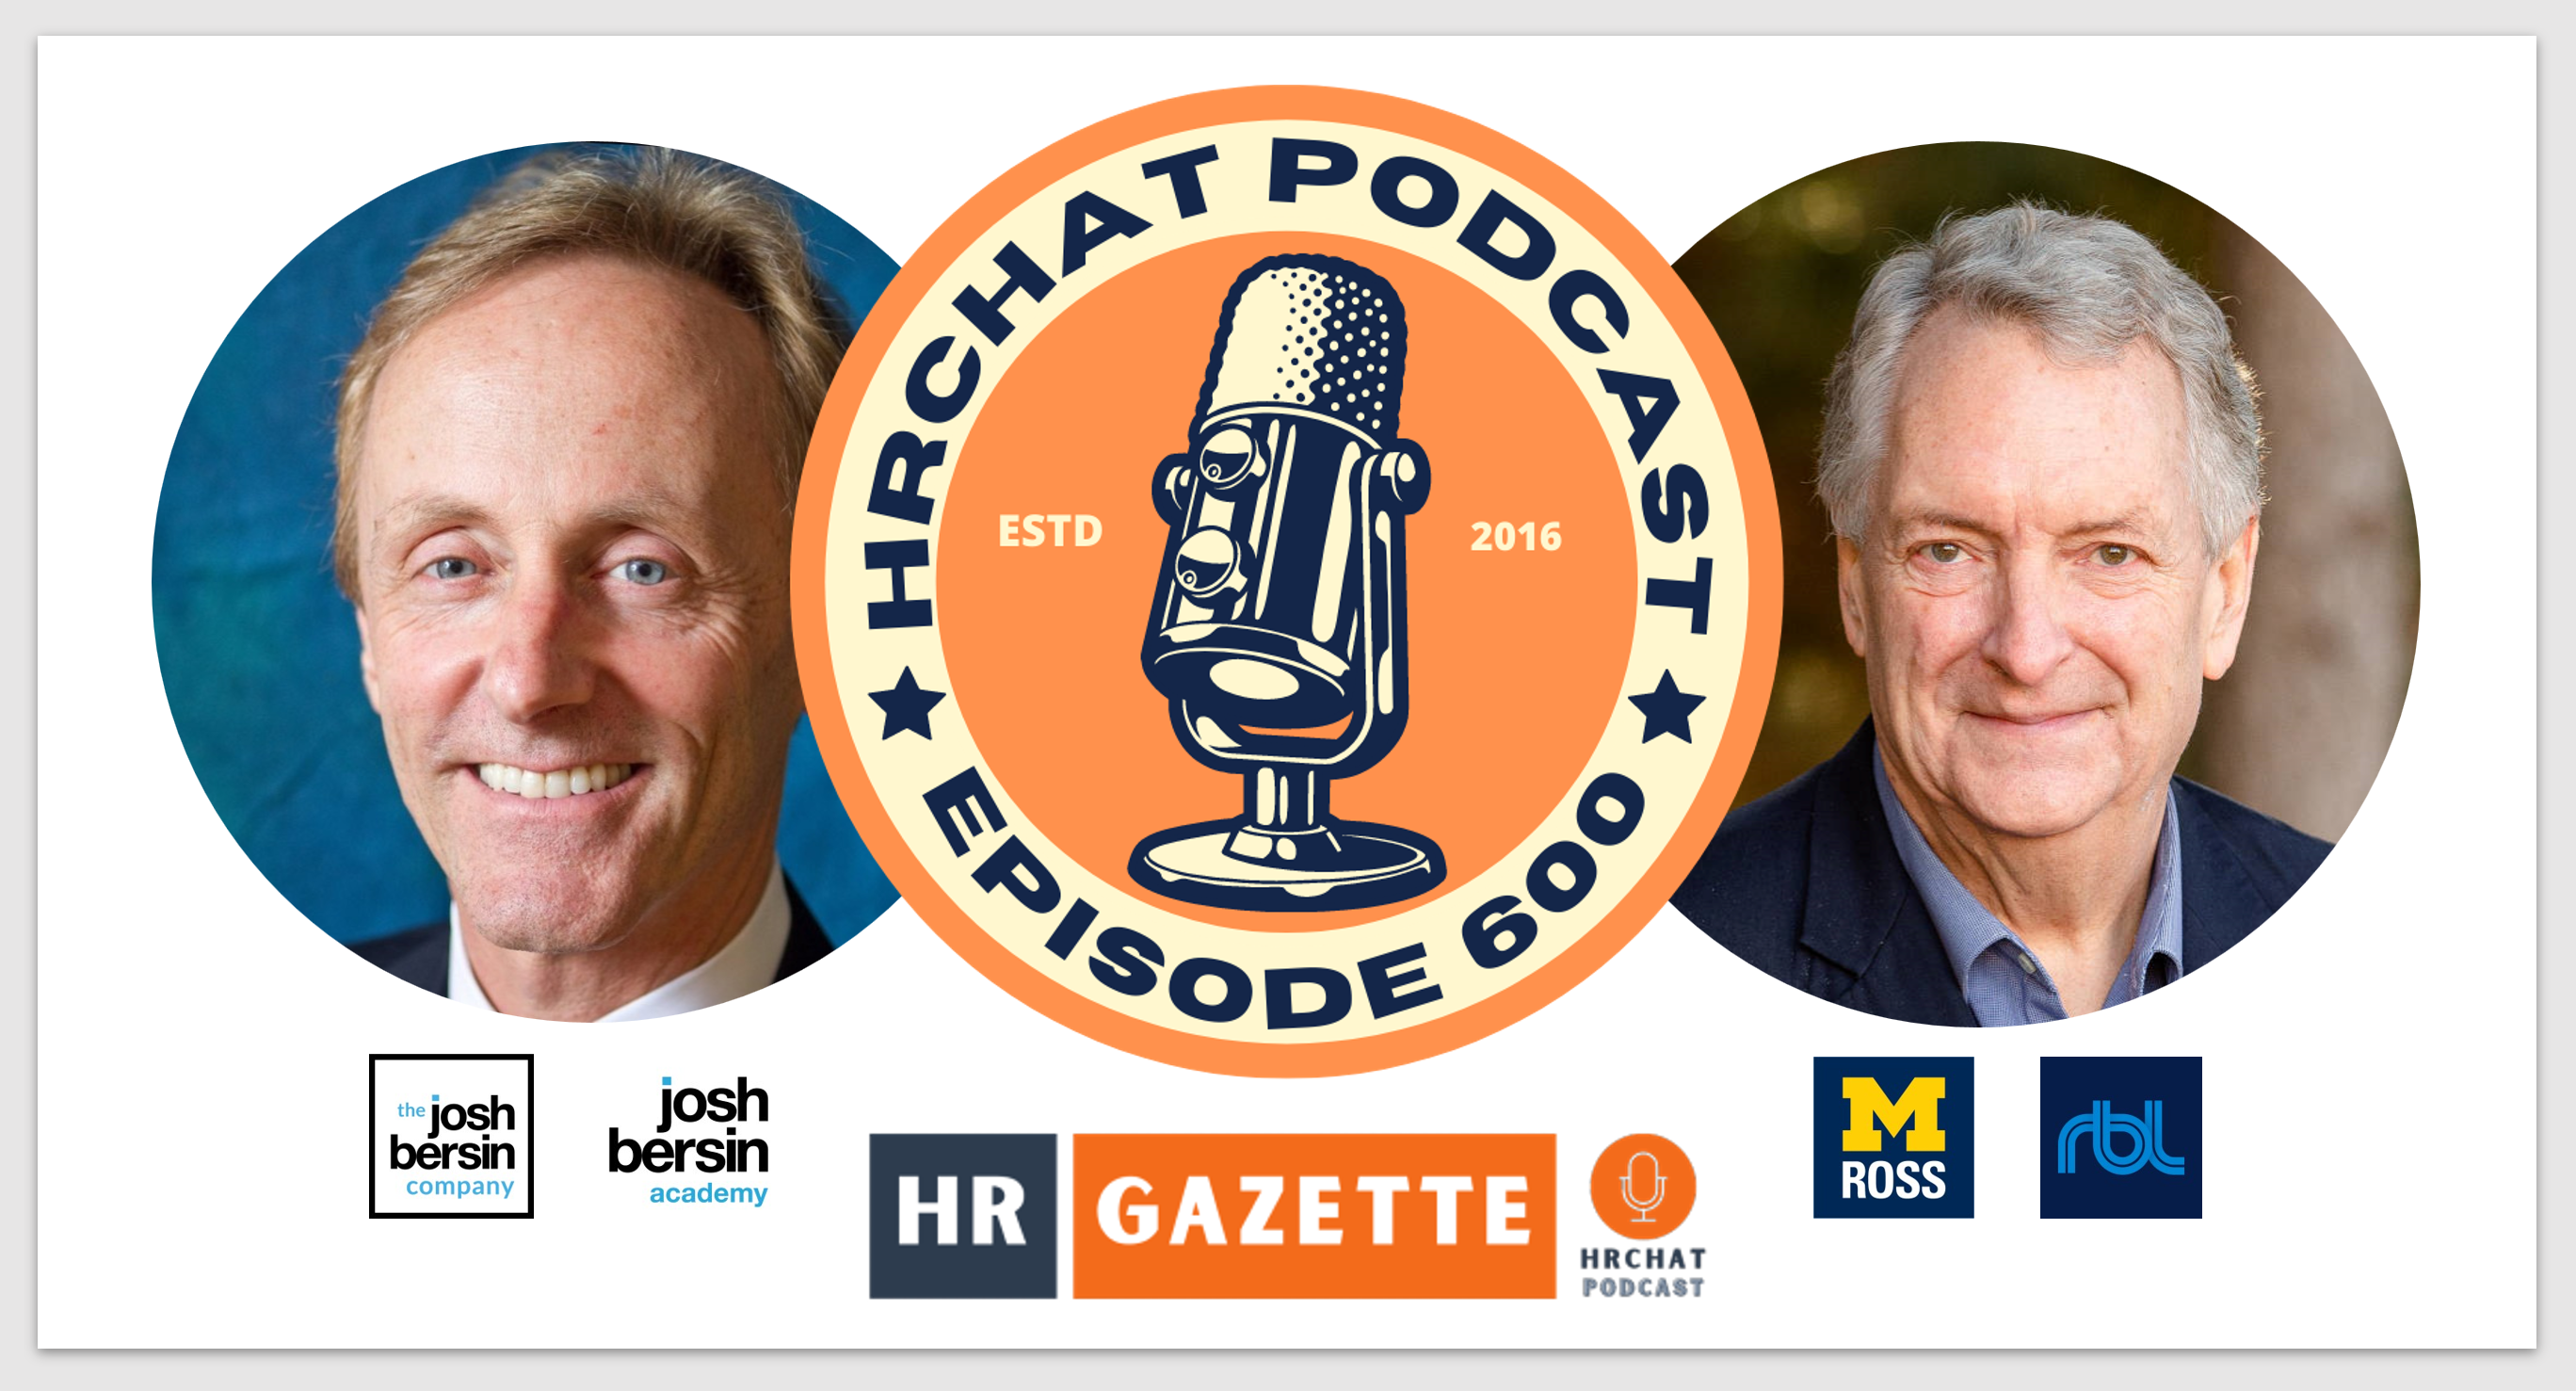 HRchat Podcast Episode 600